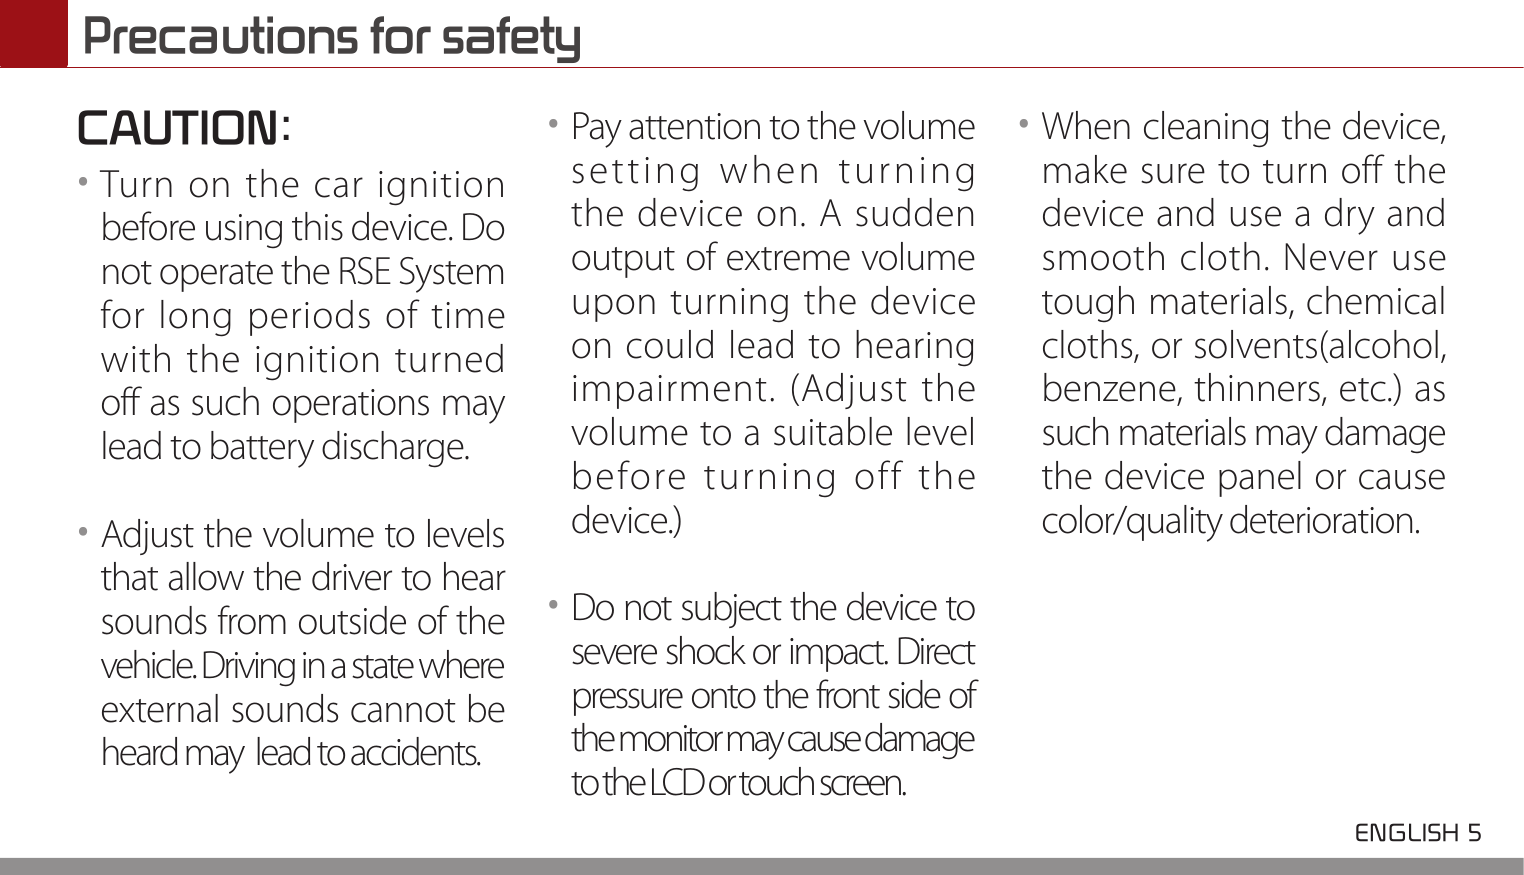  ENGLISH 5 Precautions for safetyCAUTION:••Turn on the car ignition before using this device. Do not operate the RSE System for long periods of time with the ignition turned off as such operations may lead to battery discharge.••Adjust the volume to levels that allow the driver to hear sounds from outside of the vehicle. Driving in a state where external sounds cannot be heard may  lead to accidents.••Pay attention to the volume setting when turning the device on. A sudden output of extreme volume upon turning the device on could lead to hearing impairment. (Adjust the volume to a suitable level before turning off the device.)••Do not subject the device to severe shock or impact. Direct pressure onto the front side of the monitor may cause damage to the LCD or touch screen.••When cleaning the device, make sure to turn off the device and use a dry and smooth cloth. Never use tough materials, chemical cloths, or solvents(alcohol, benzene, thinners, etc.) as such materials may damage the device panel or cause color/quality deterioration. 